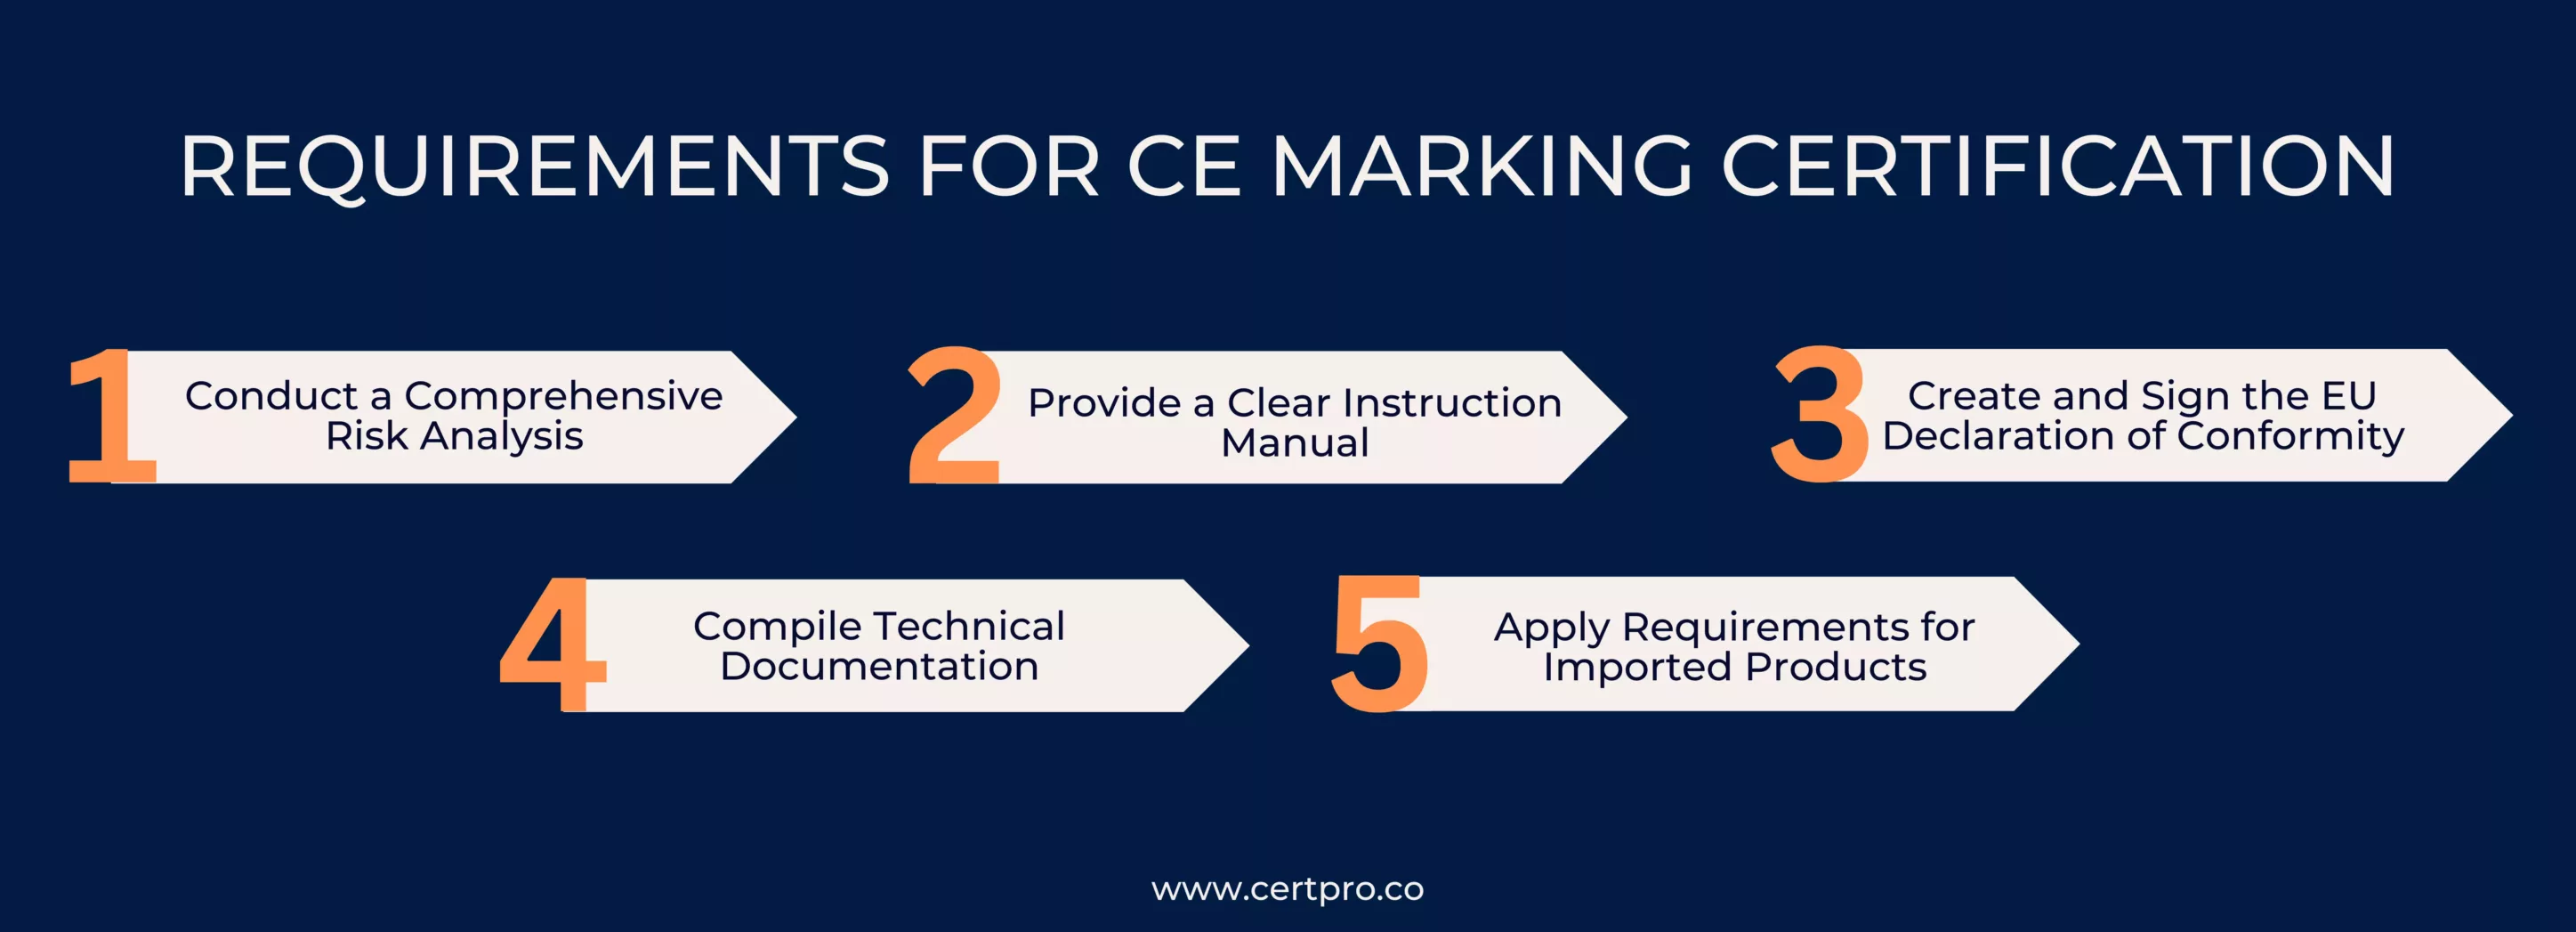 requirements for ce marking